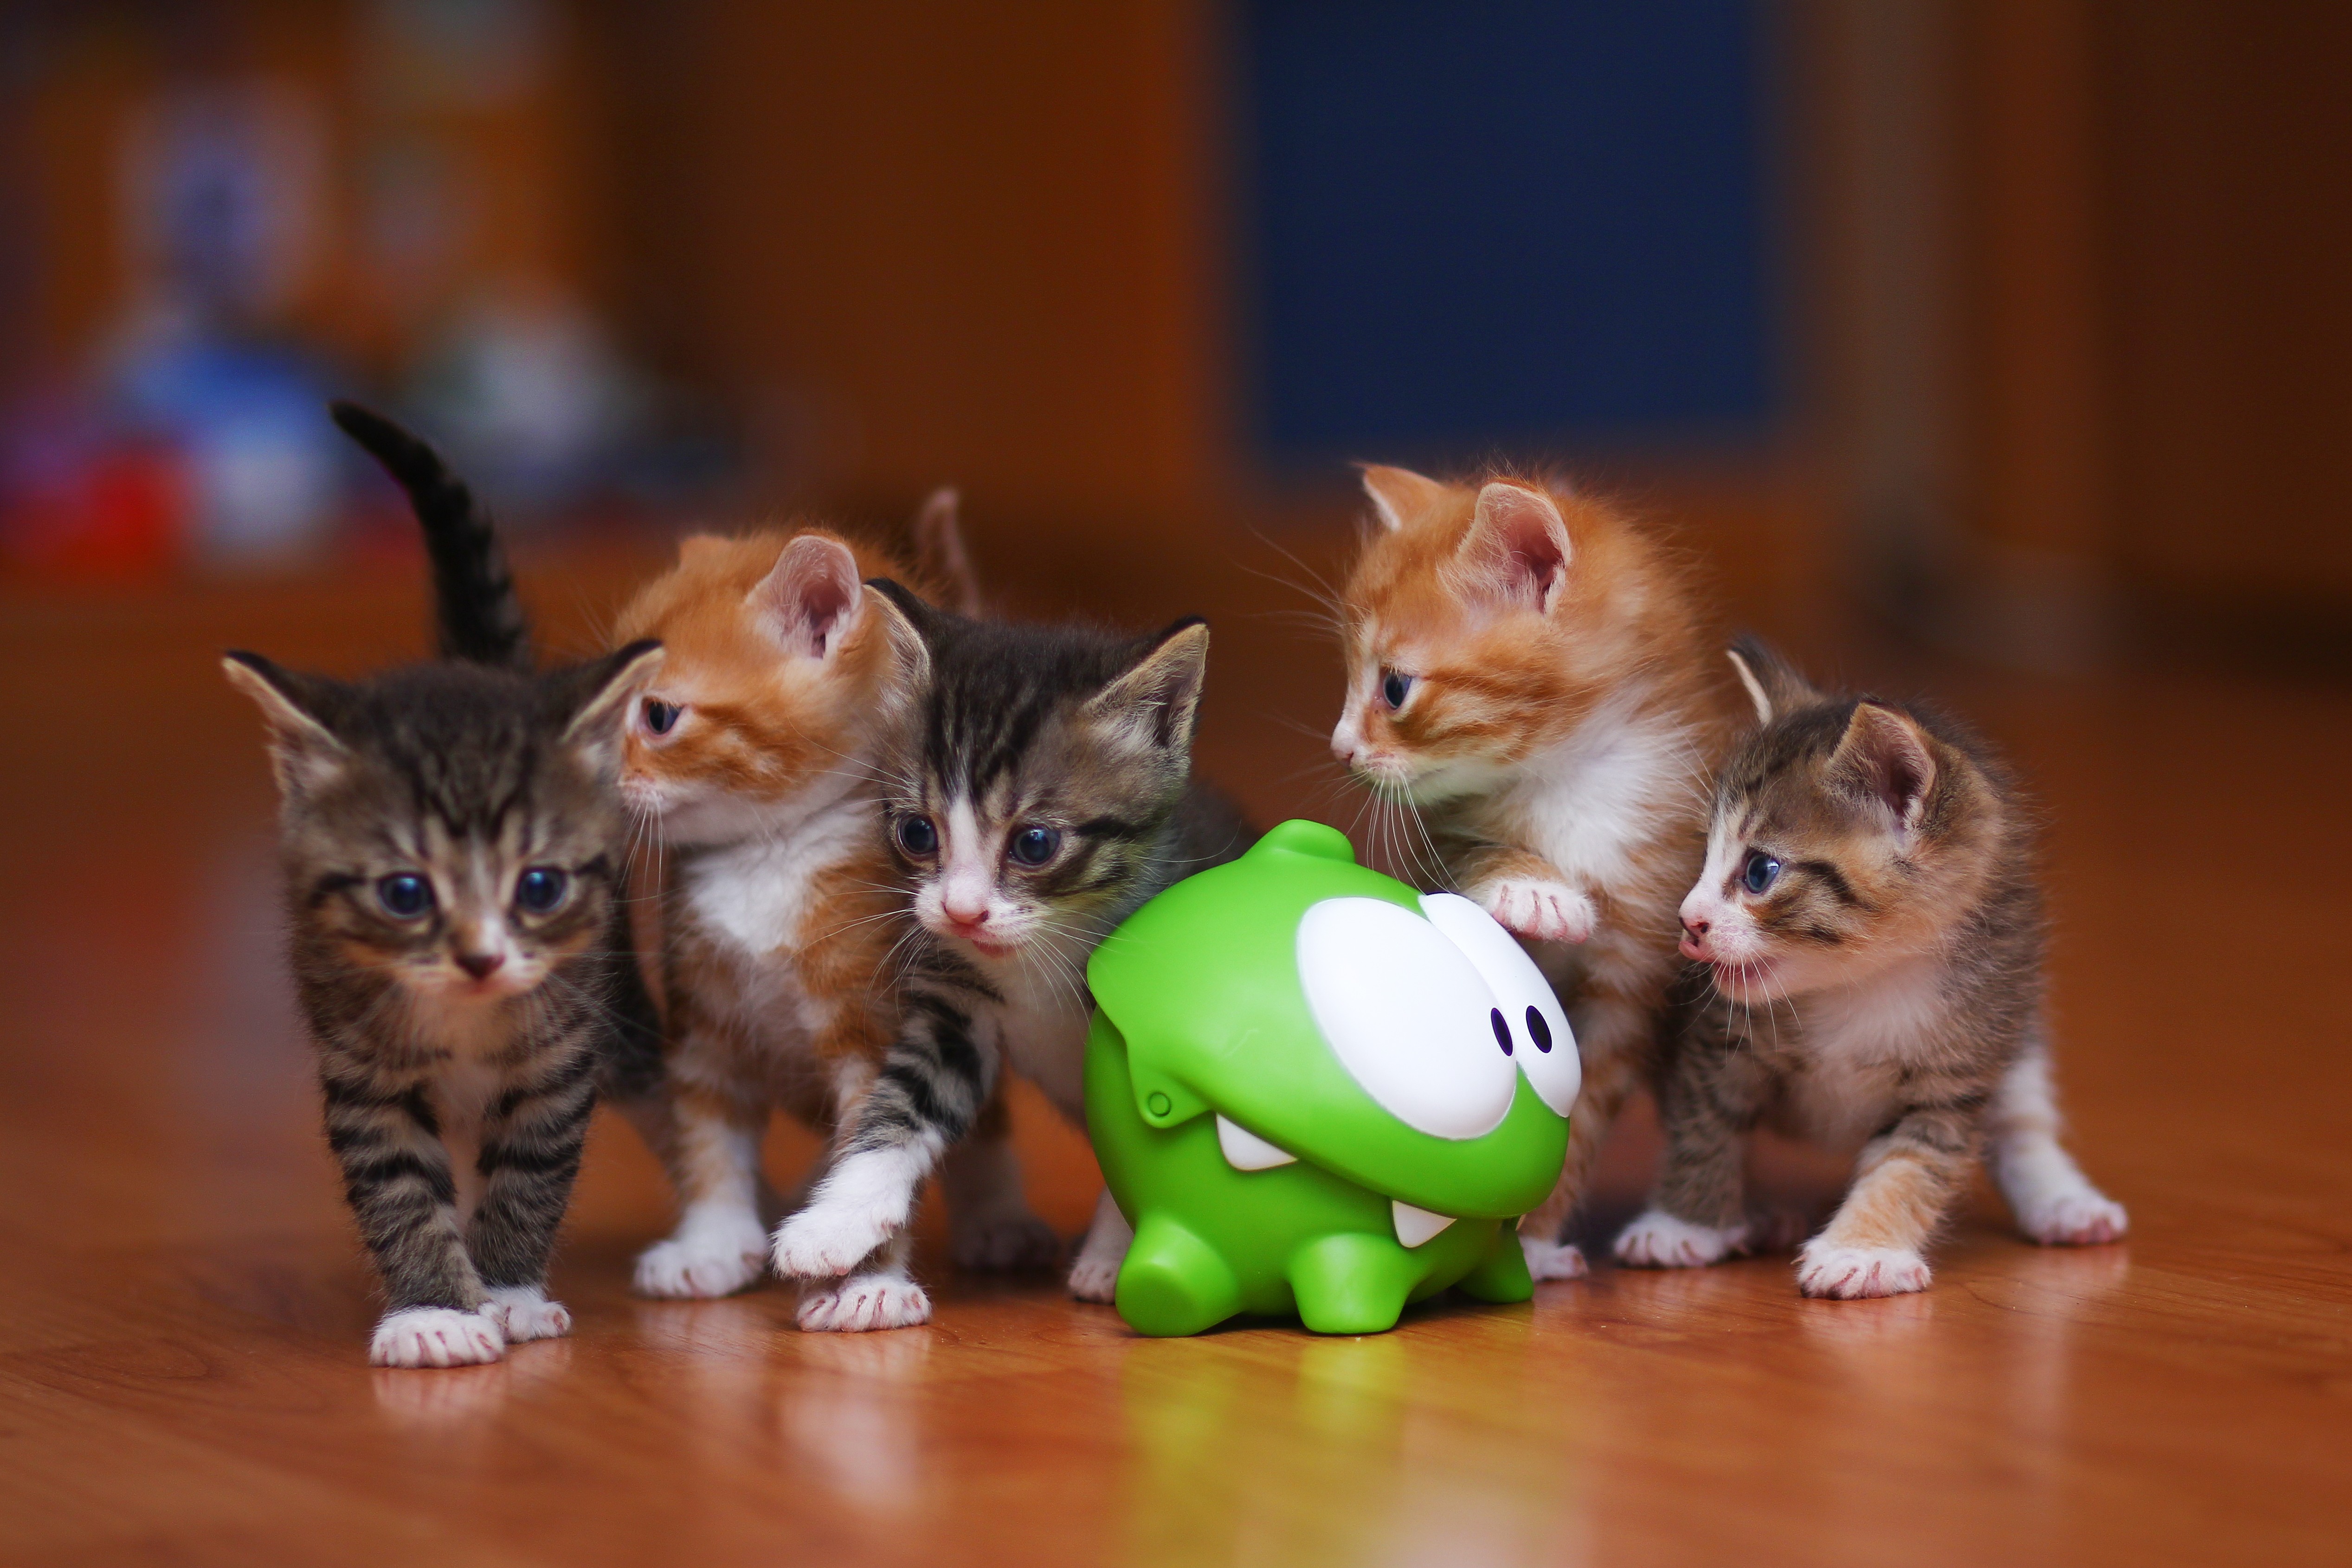 General 5069x3379 photography kittens baby animals cats animals indoors mammals toys closeup